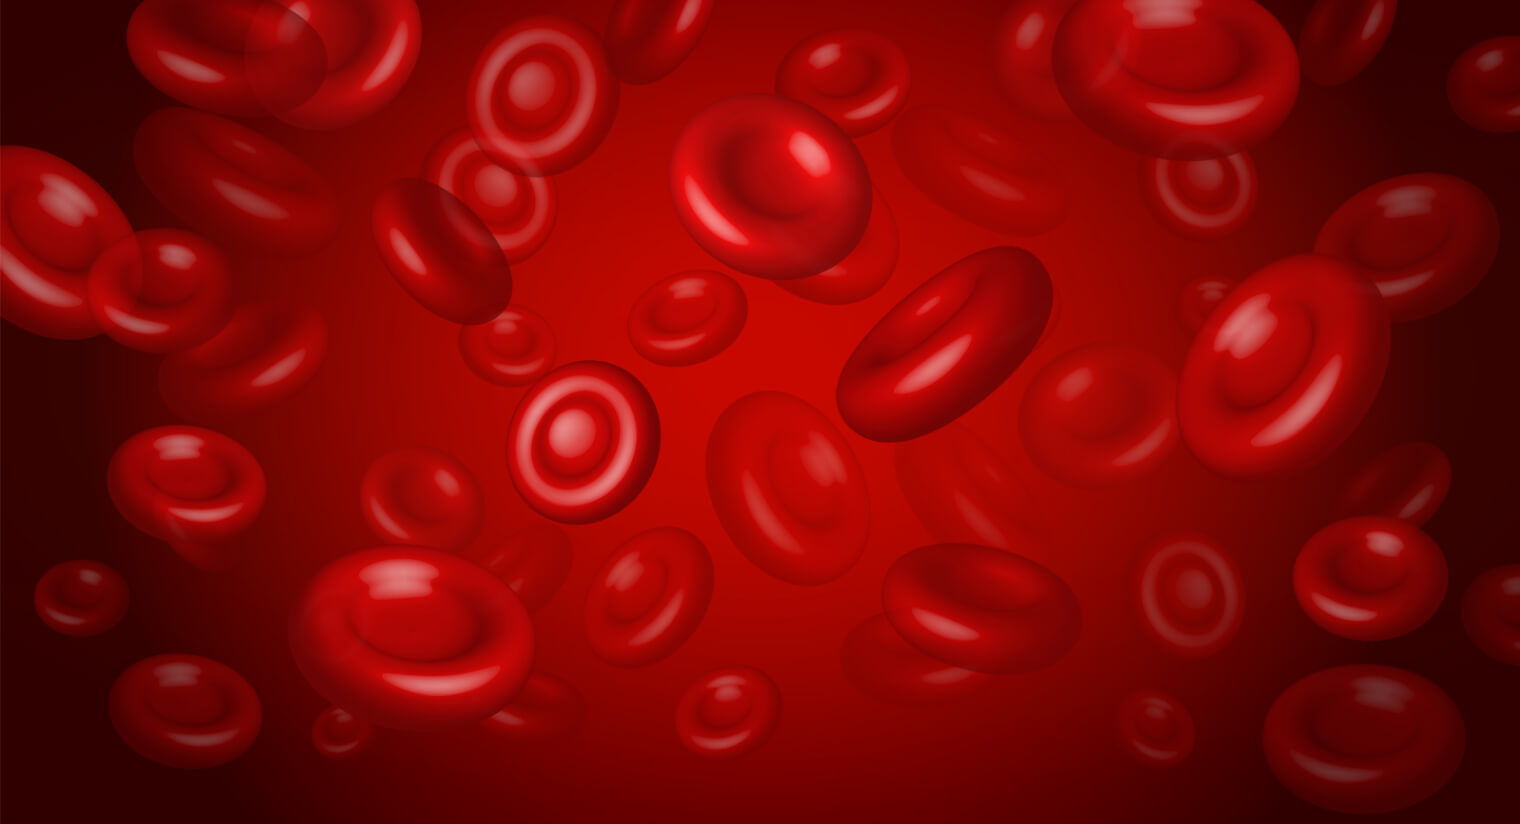 What does a blood count disclose about your health?